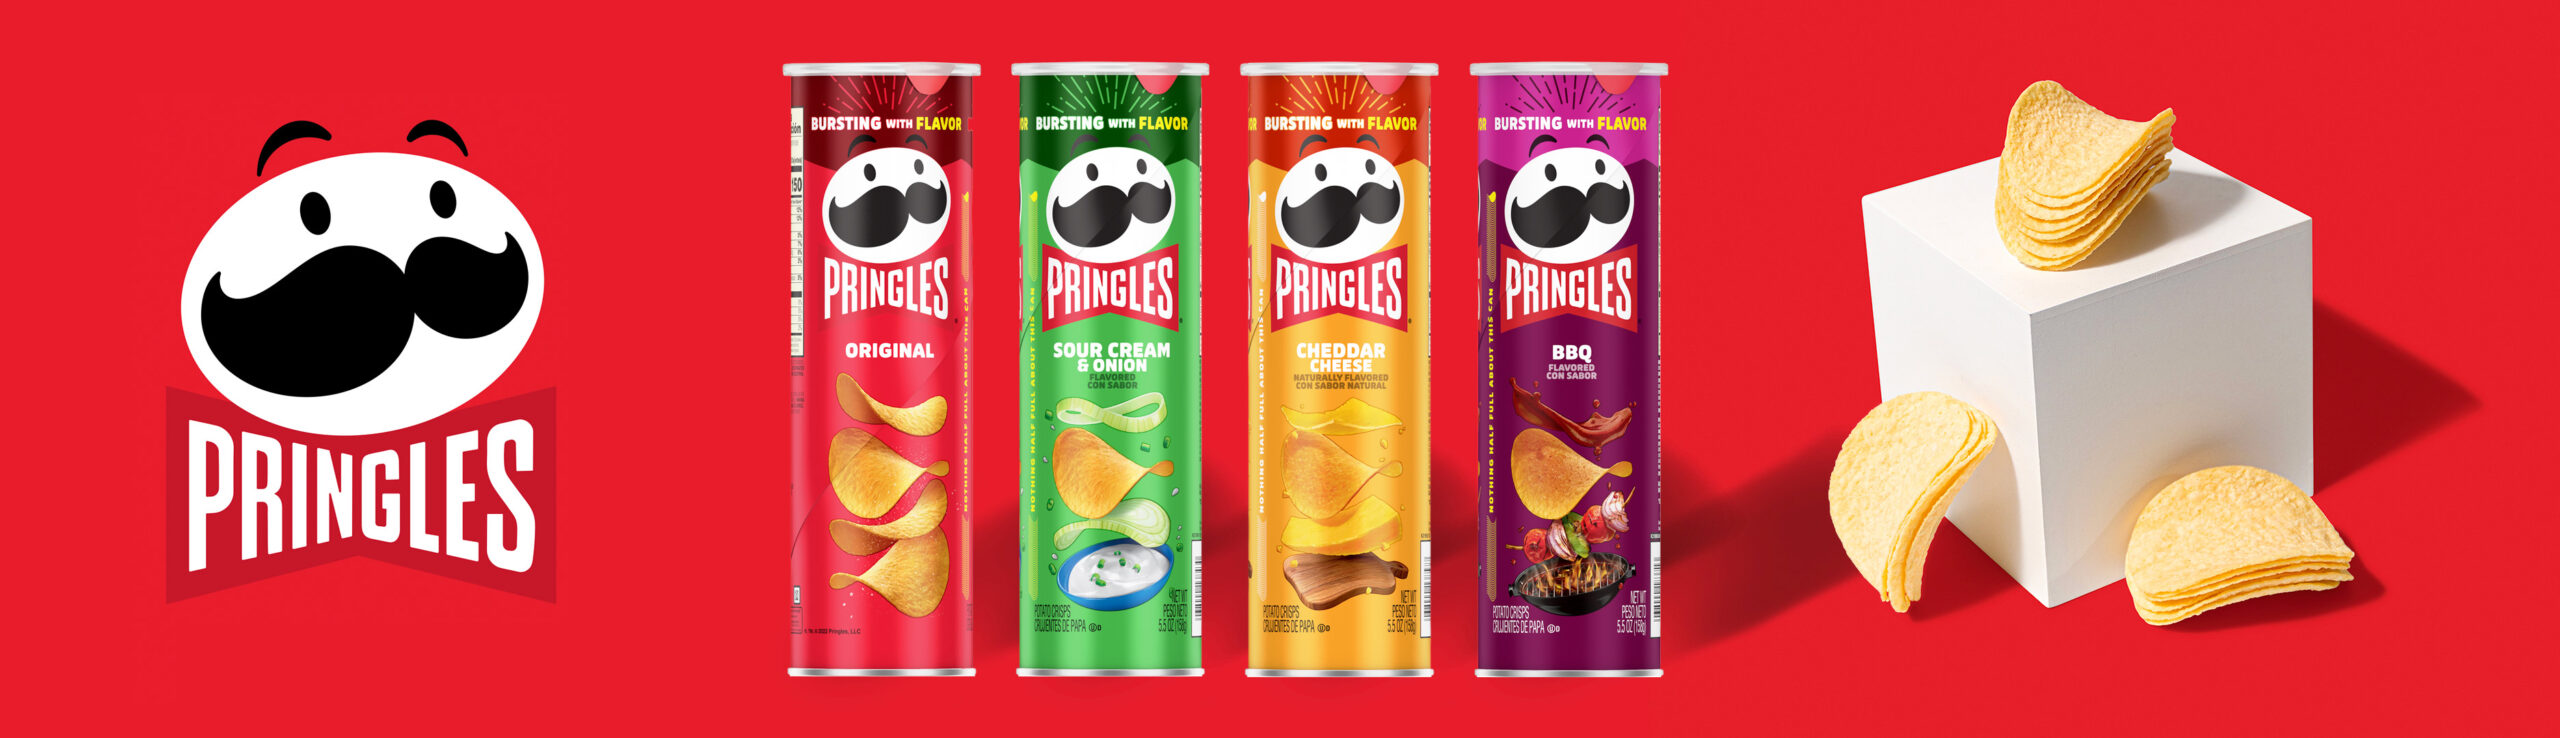 Pringles Gaming and Giveaway Instant Win Game